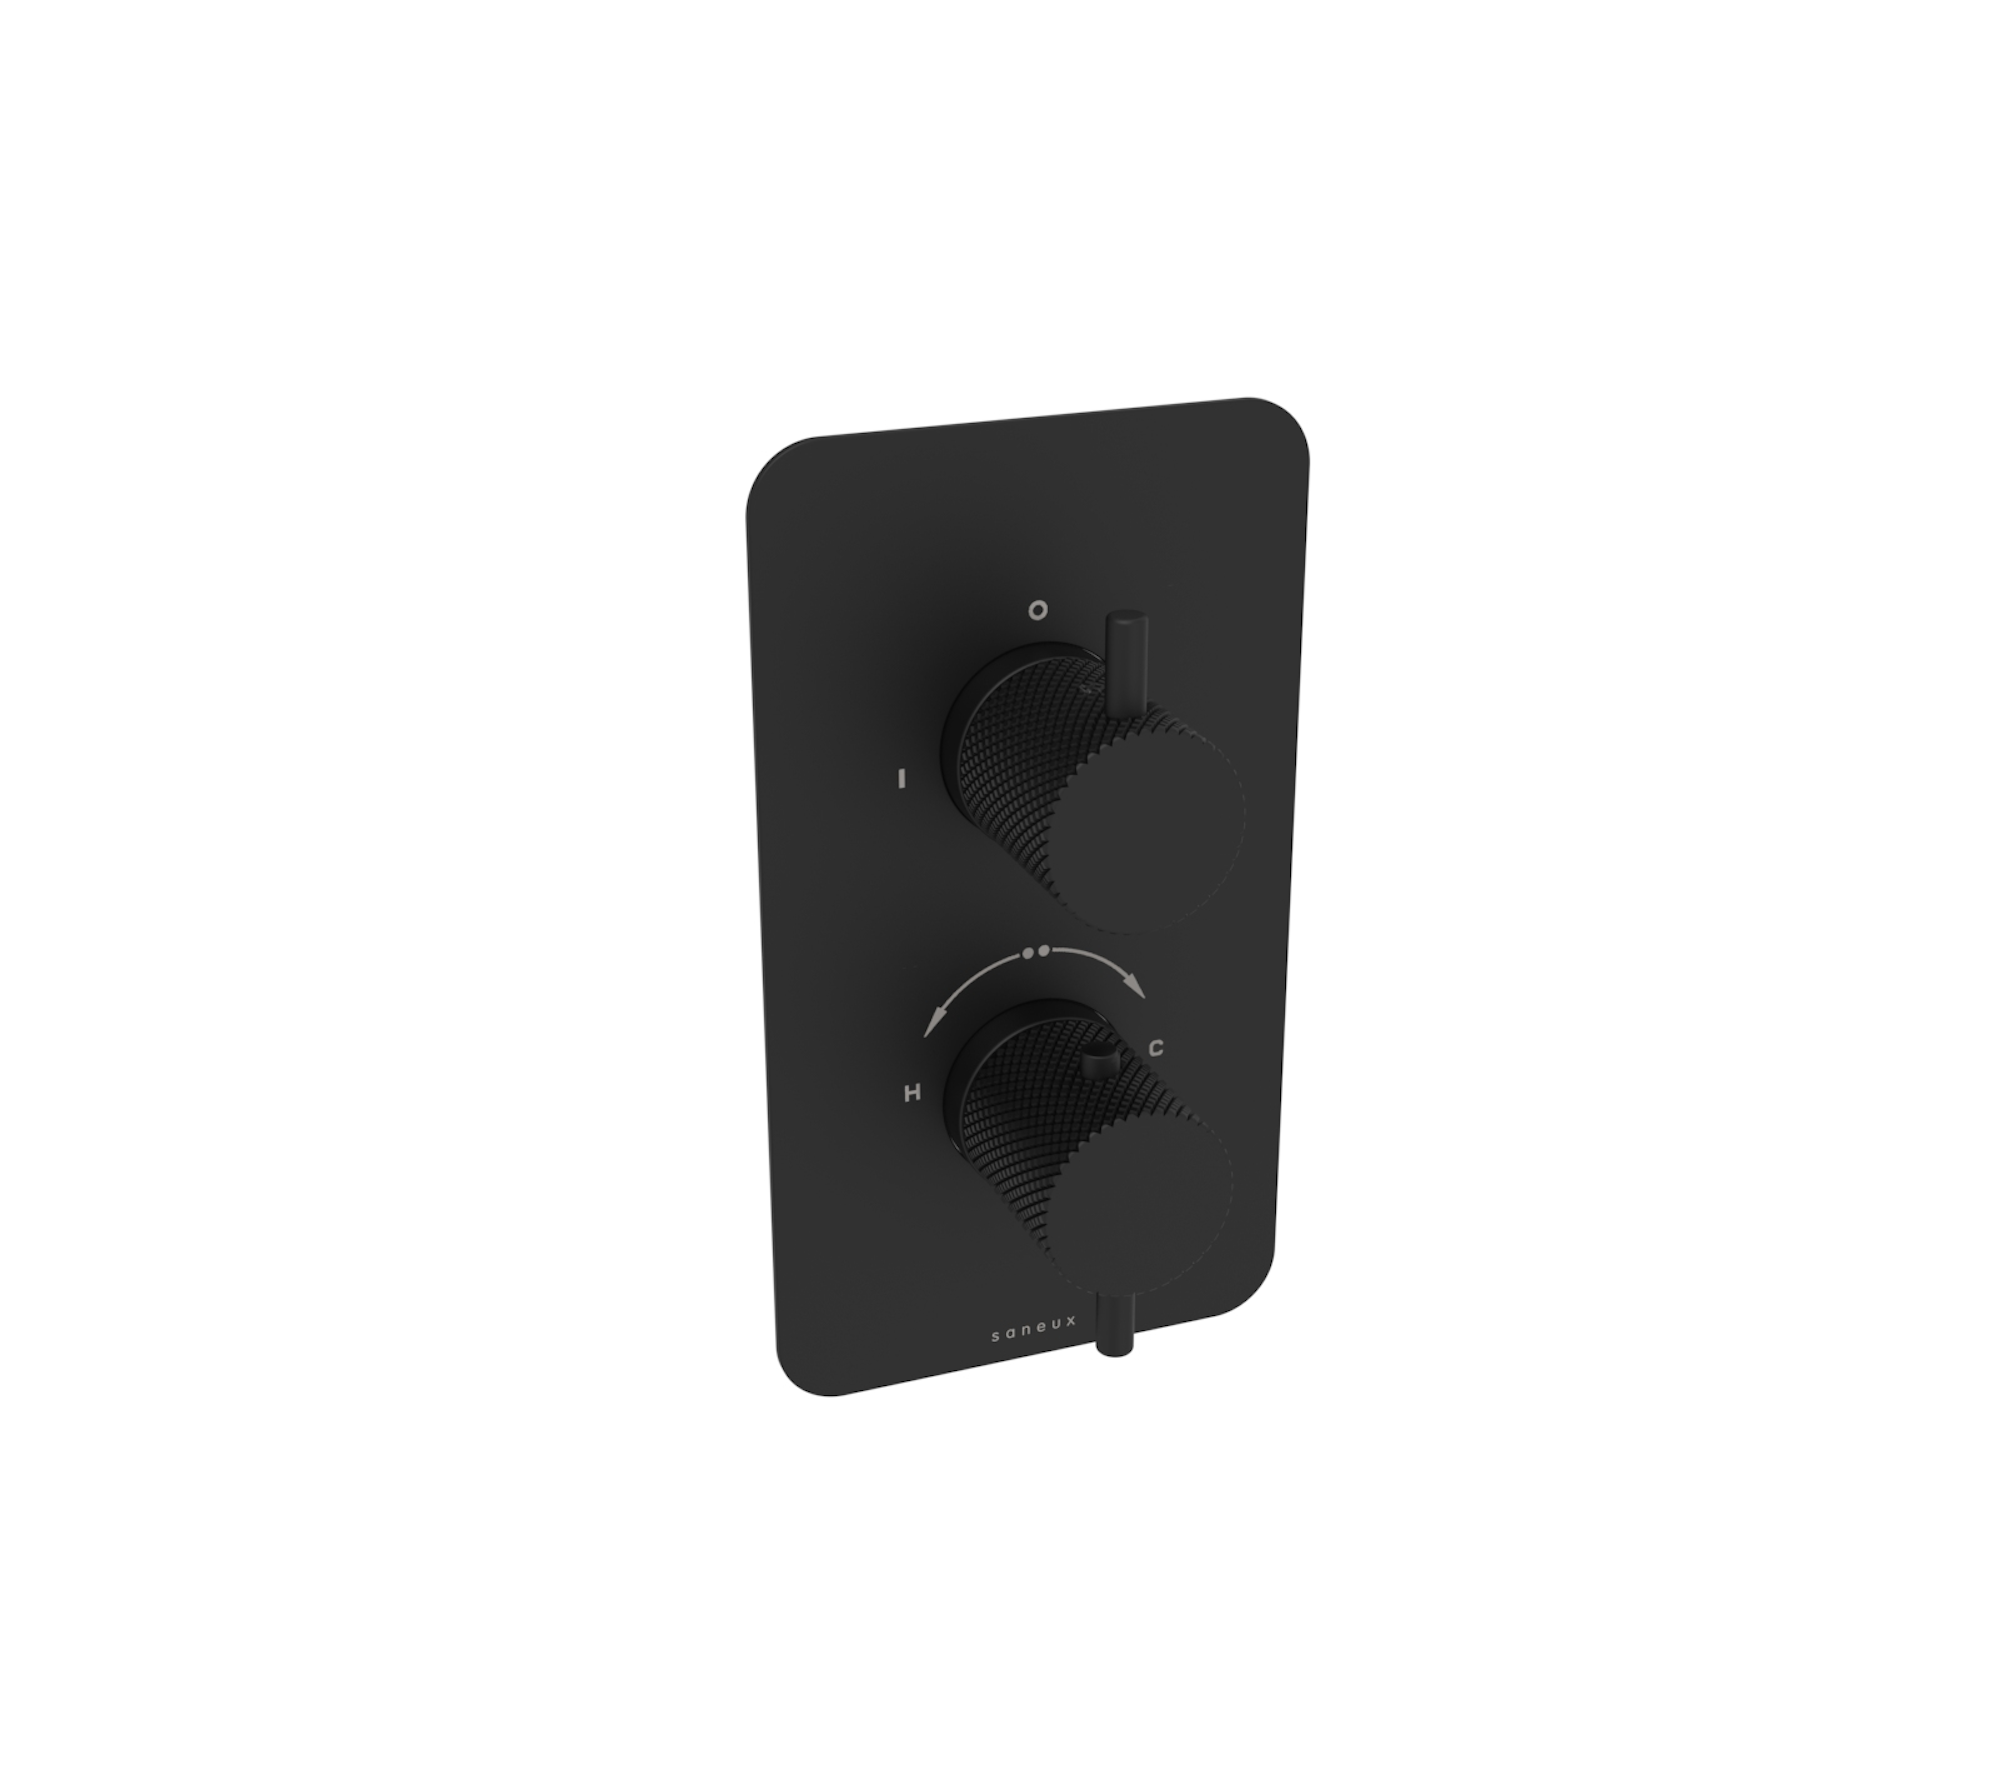 COS 2 way thermostatic shower valve kit with knurled handles - Matte Black